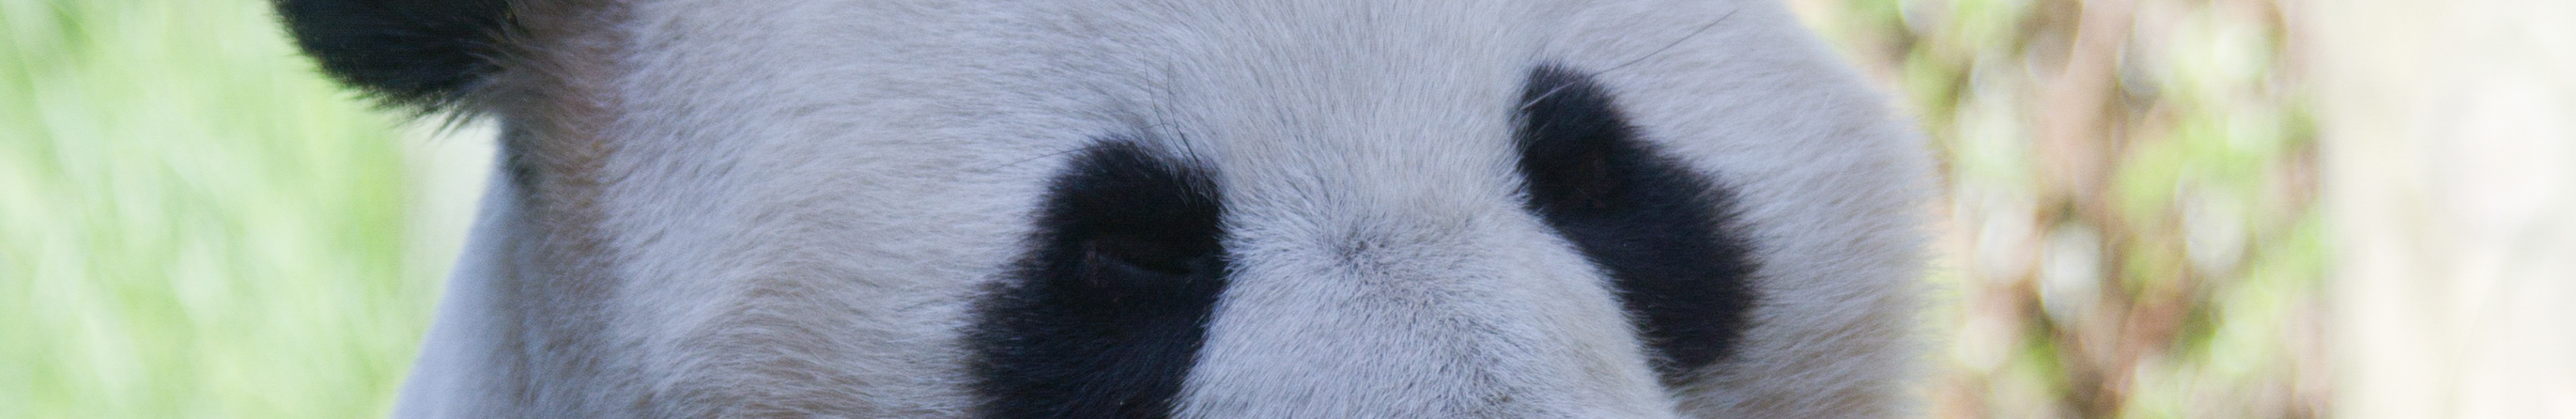 A panda zoomed into their eyes and ears